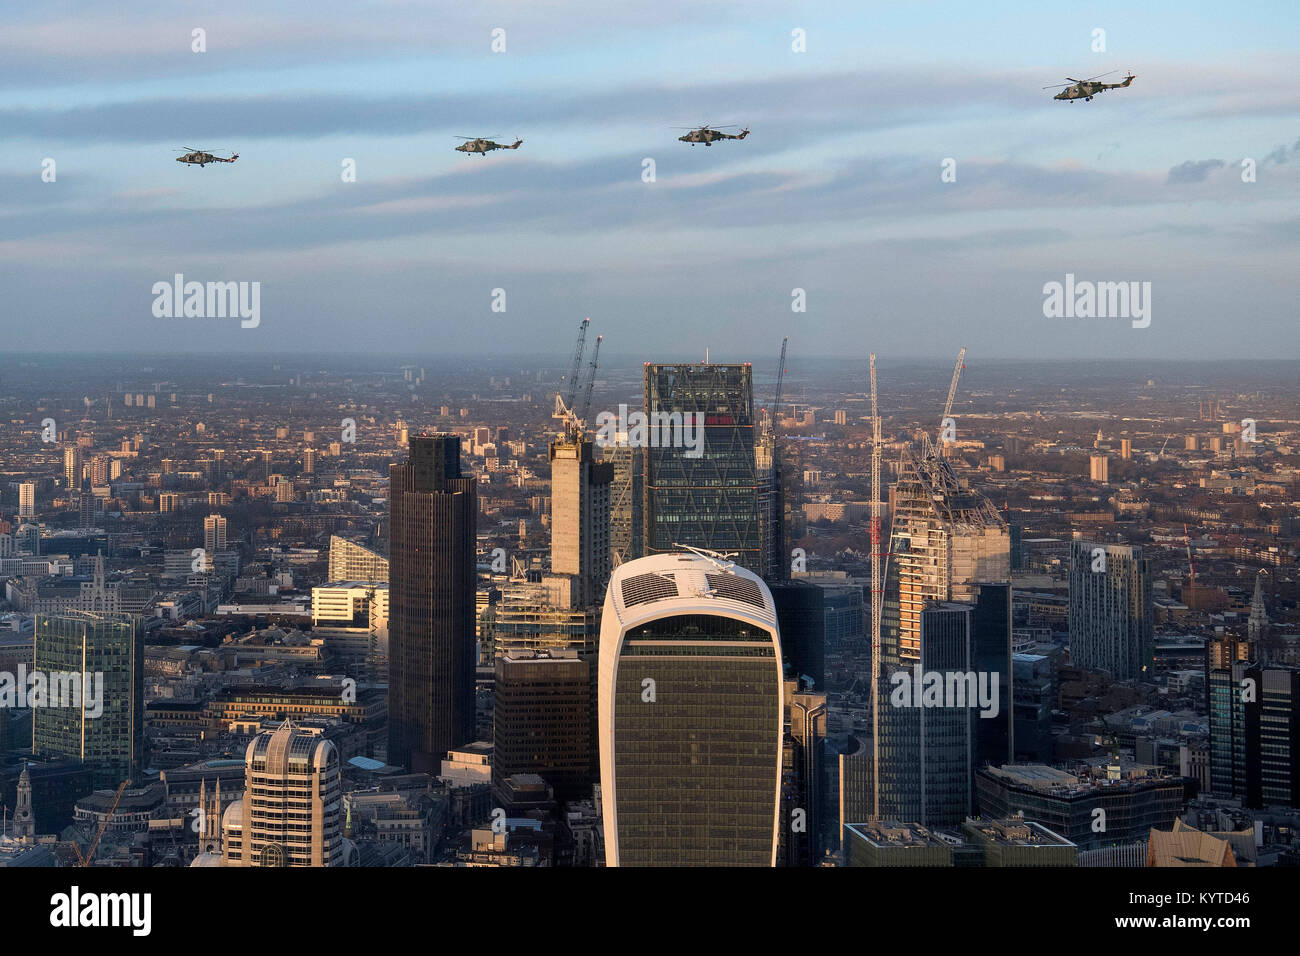 Four Lynx helicopters flying over The City in London, as seen from The ...